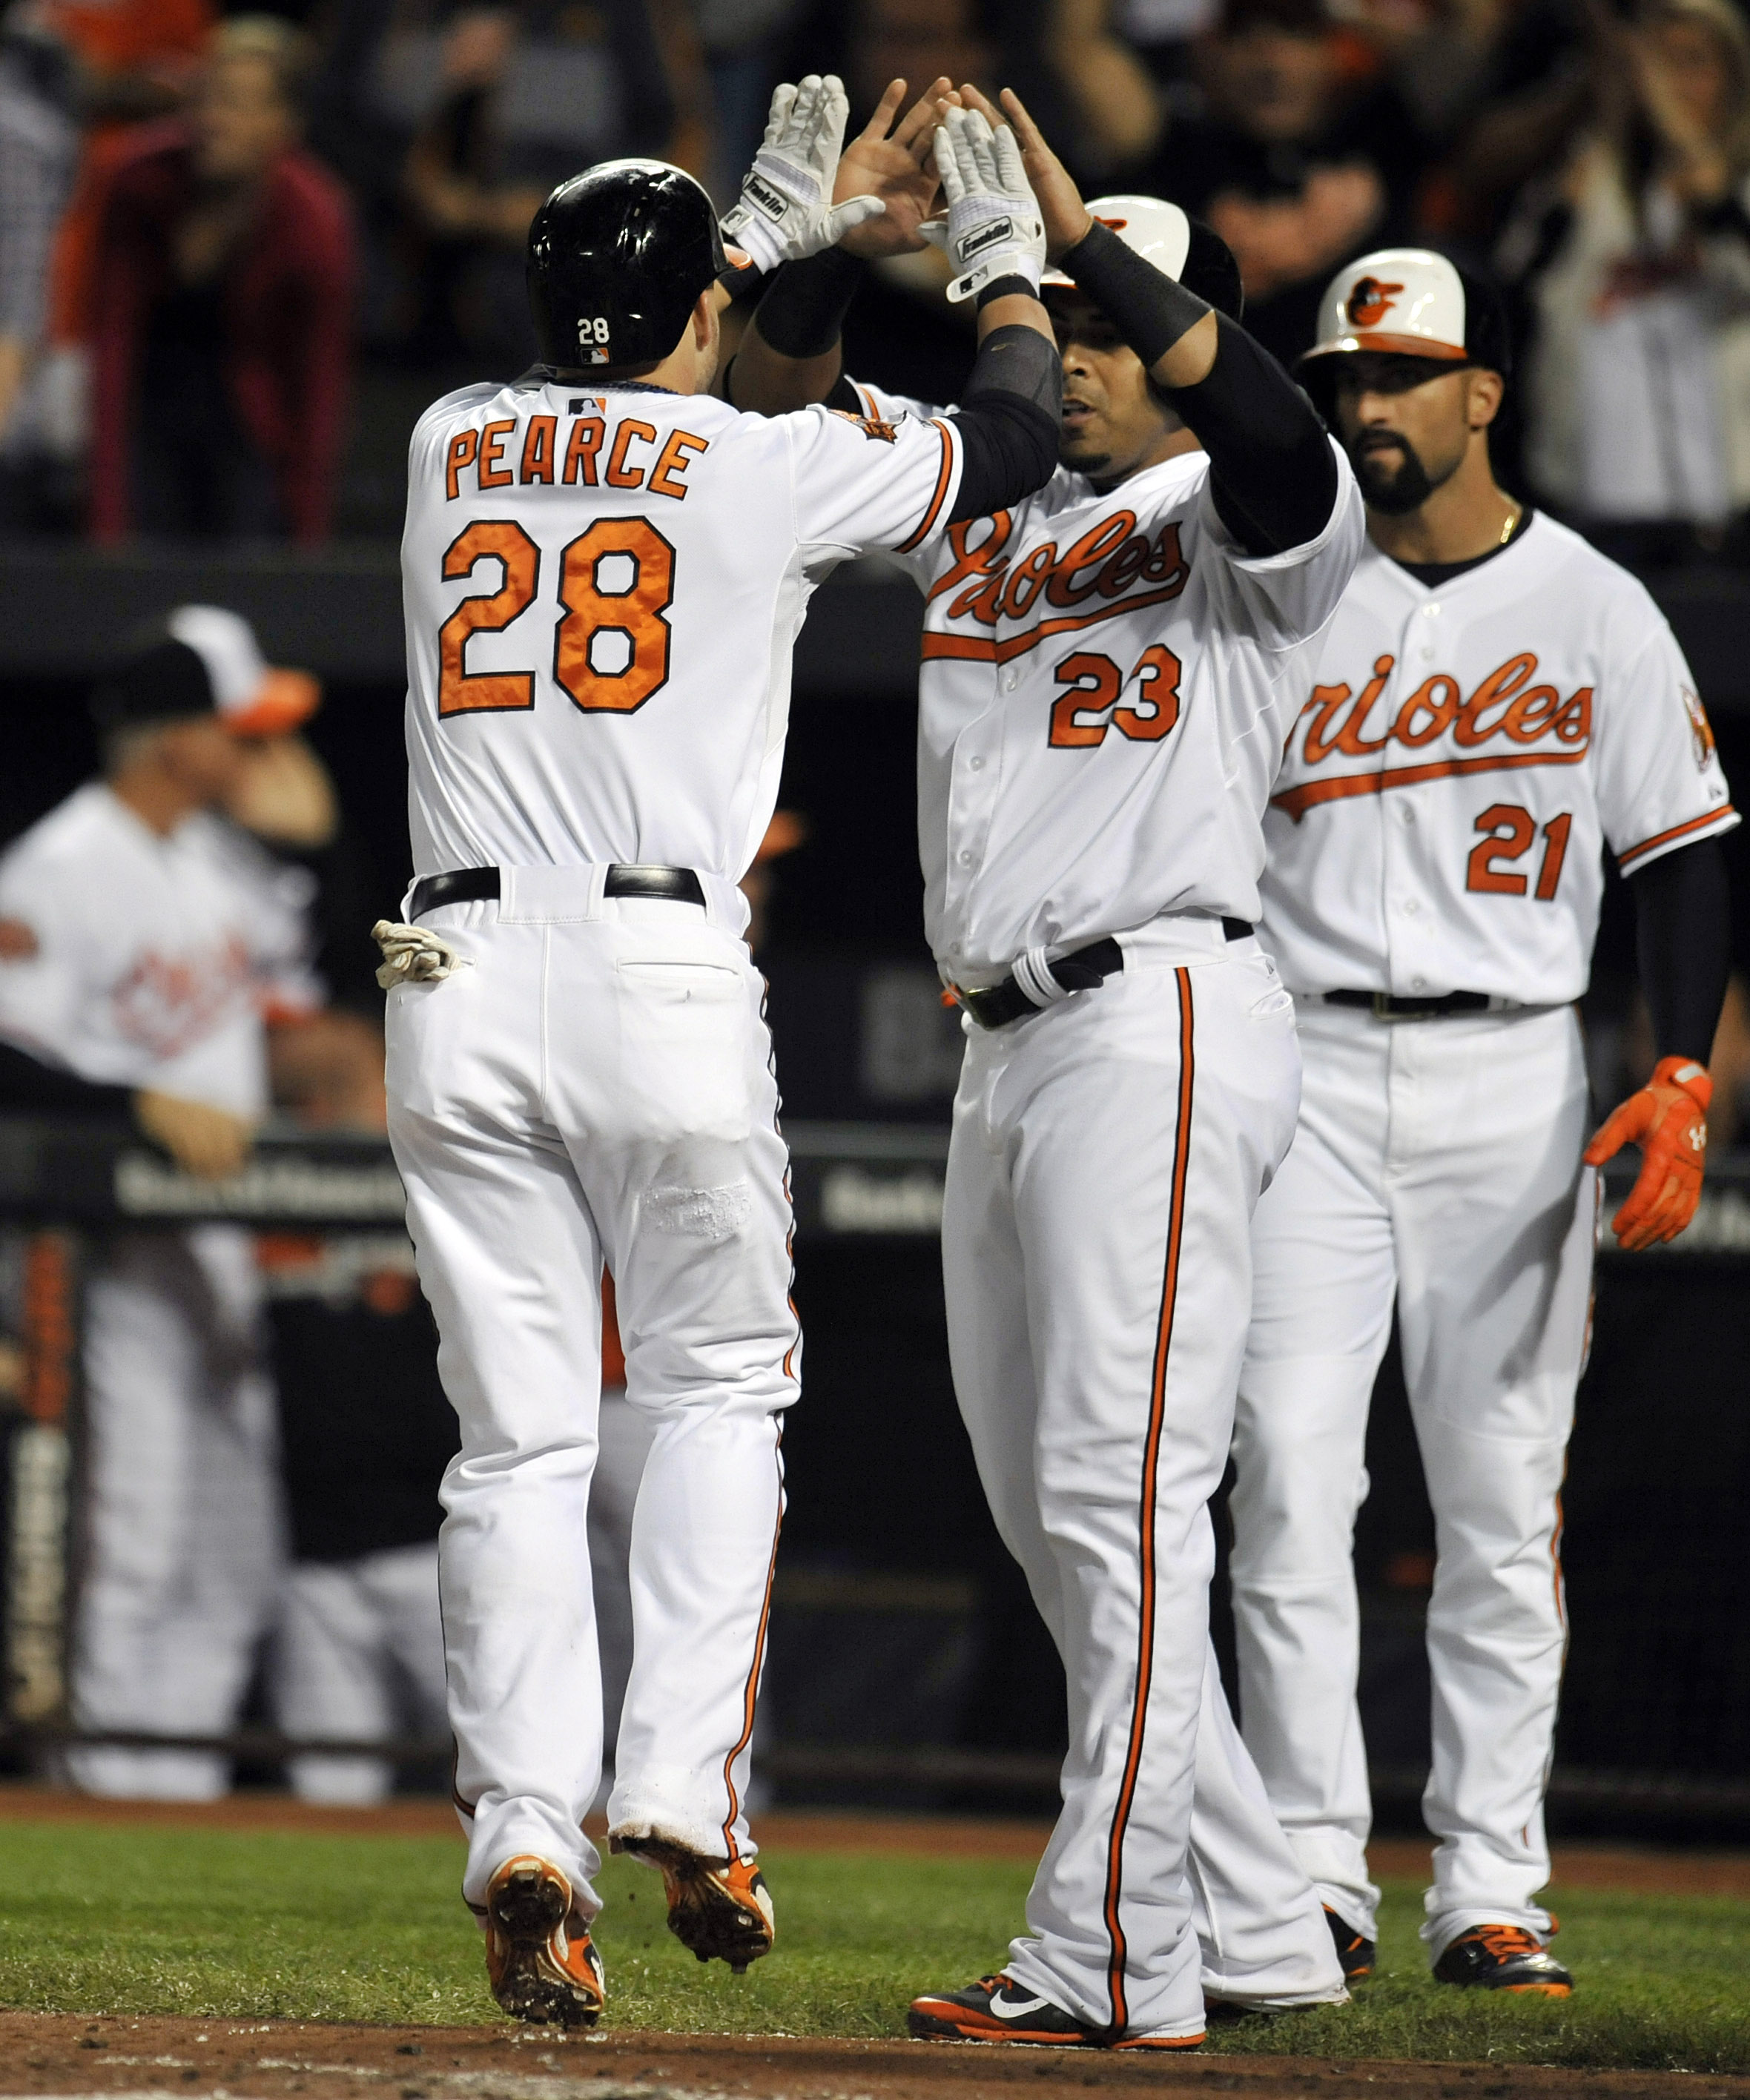 Orioles clinch first division title since '97